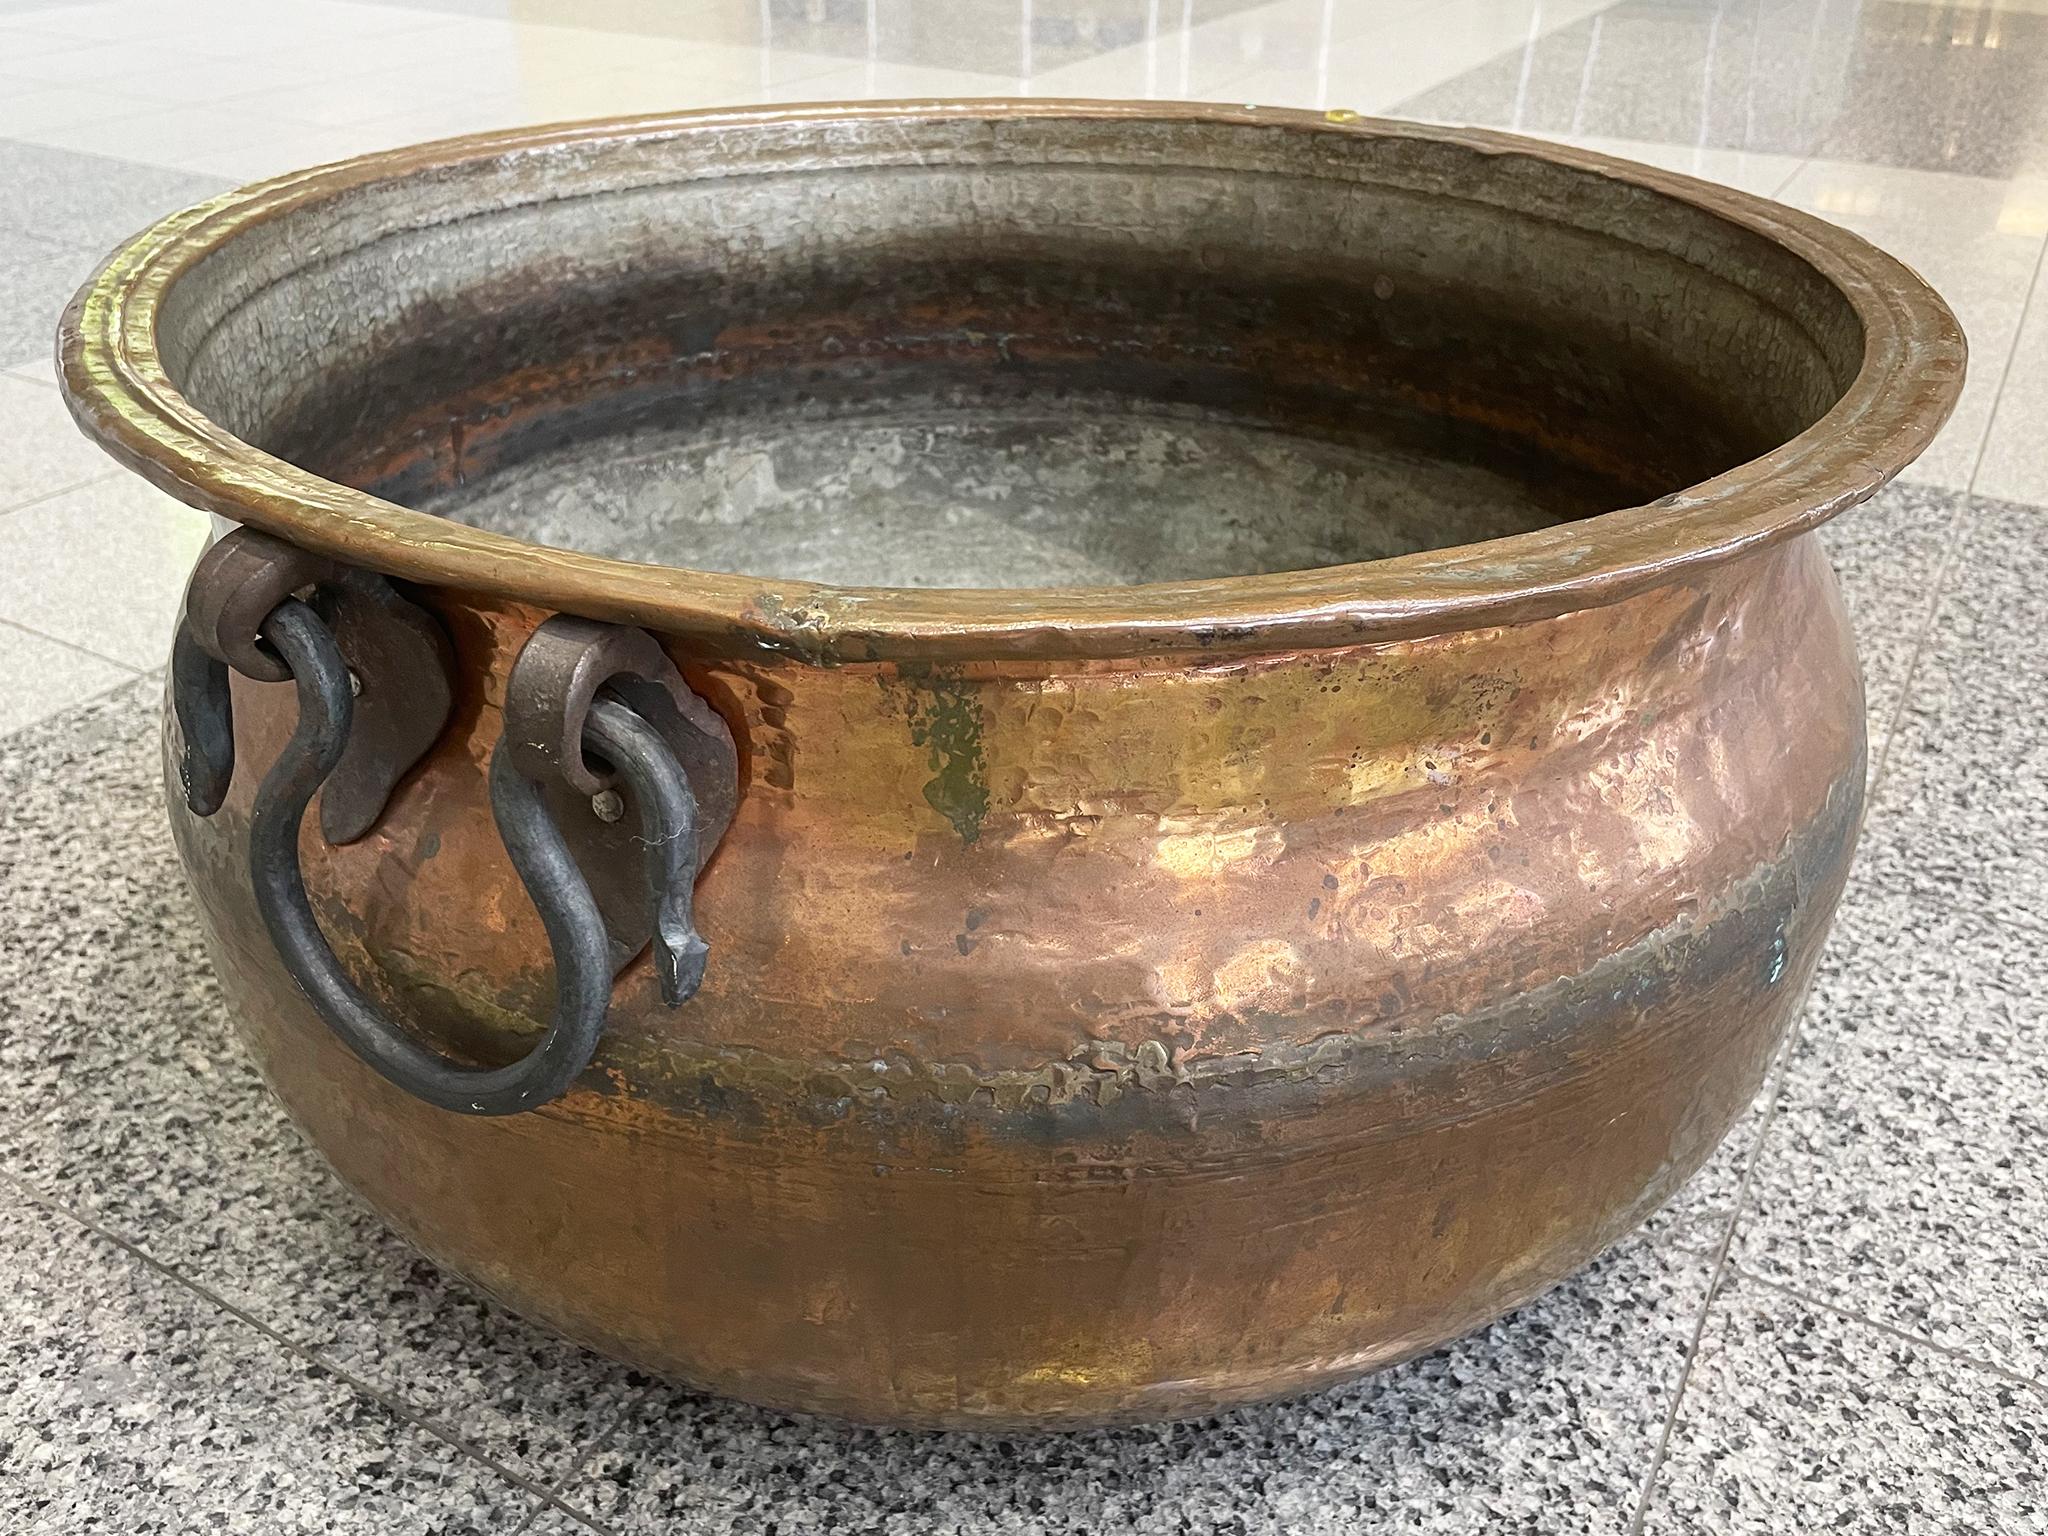 This large, antique cauldron is made from hammered copper with wrought iron handles. It stands out for its luster, beautifully tactile surface, and the variety of color in the metal's patina.

Dimensions:
24.5 in. diameter
14.5 in.